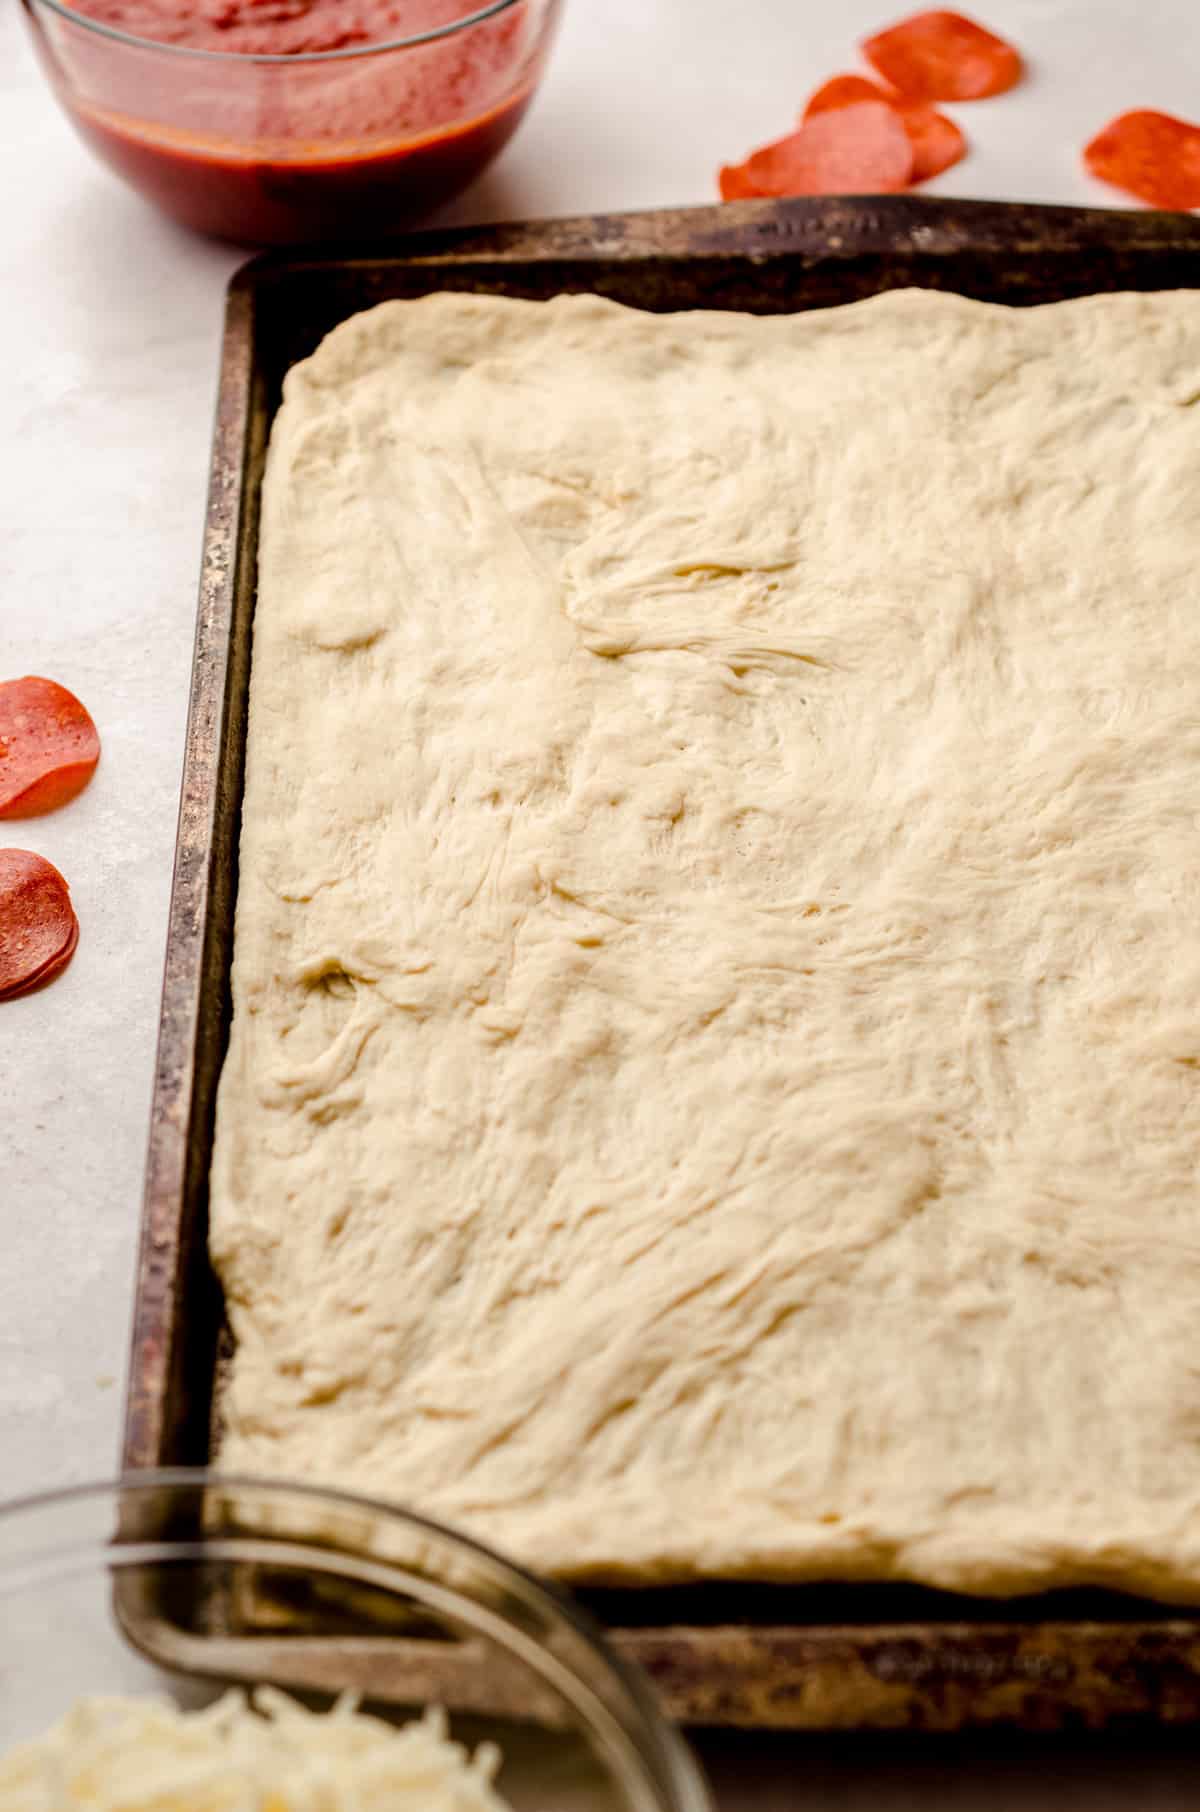 A sheet pan filled with stretched homemade pizza dough.